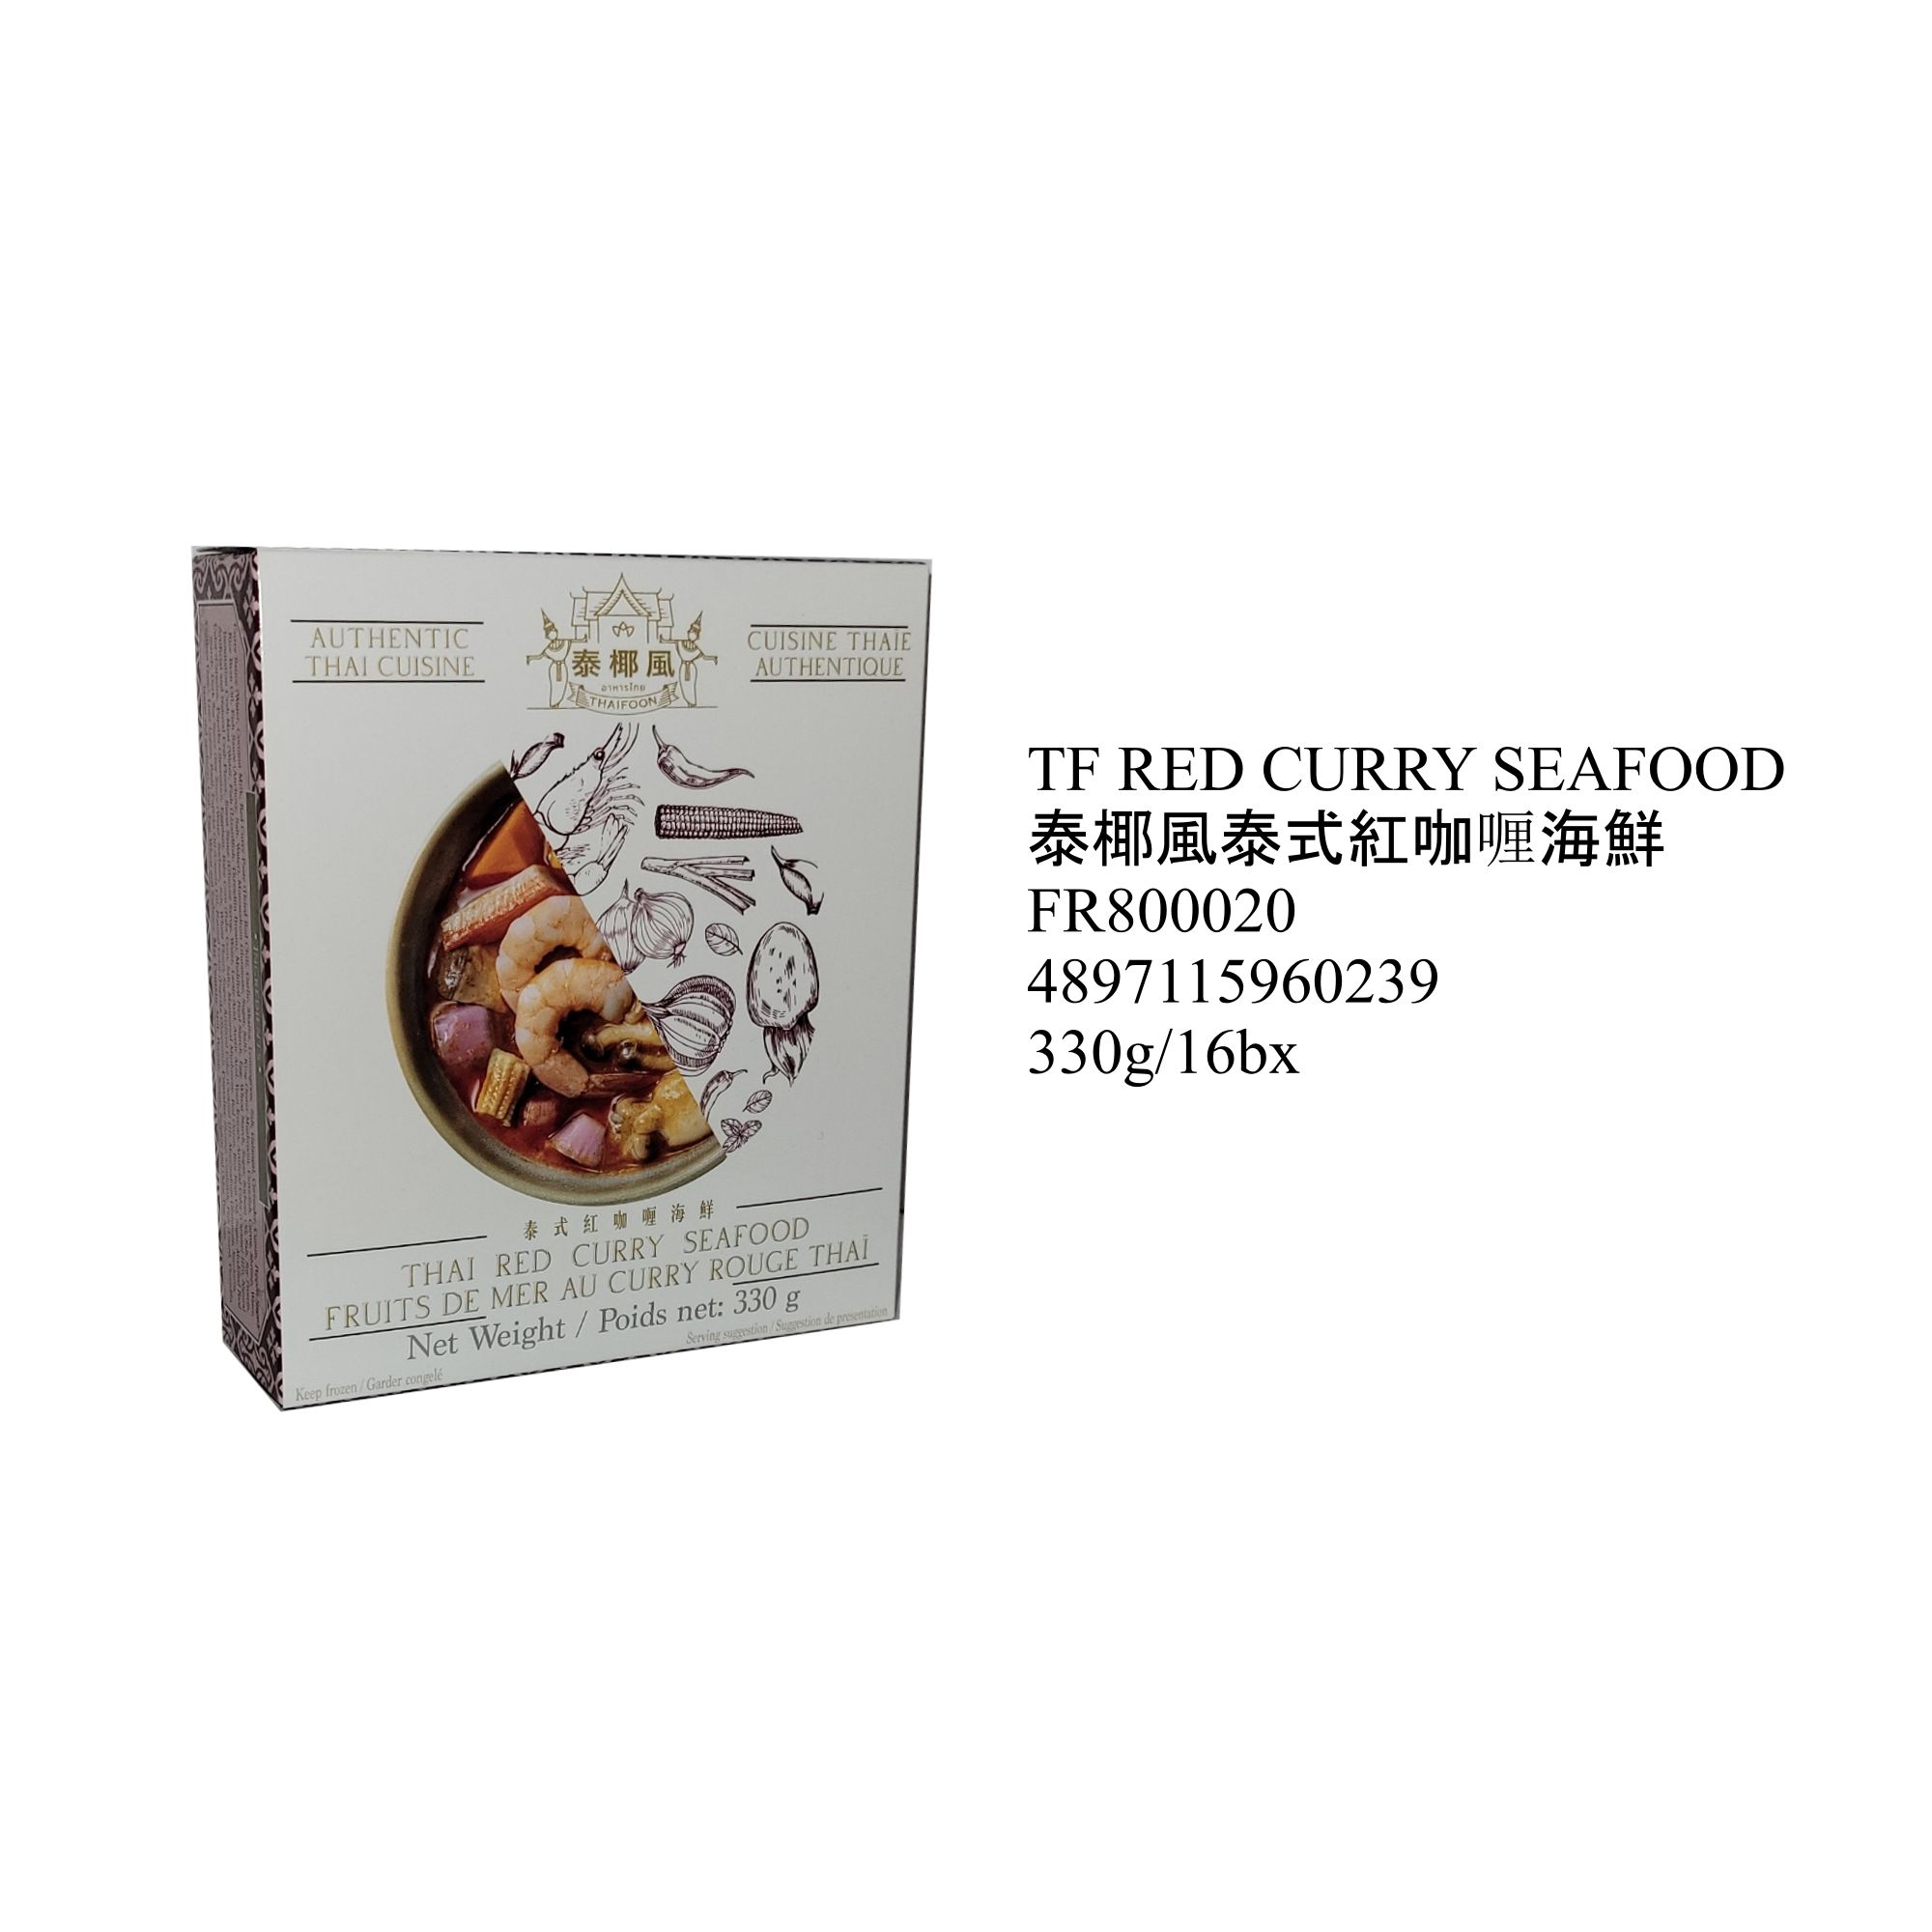 TF RED CURRY SEAFOOD FR800020